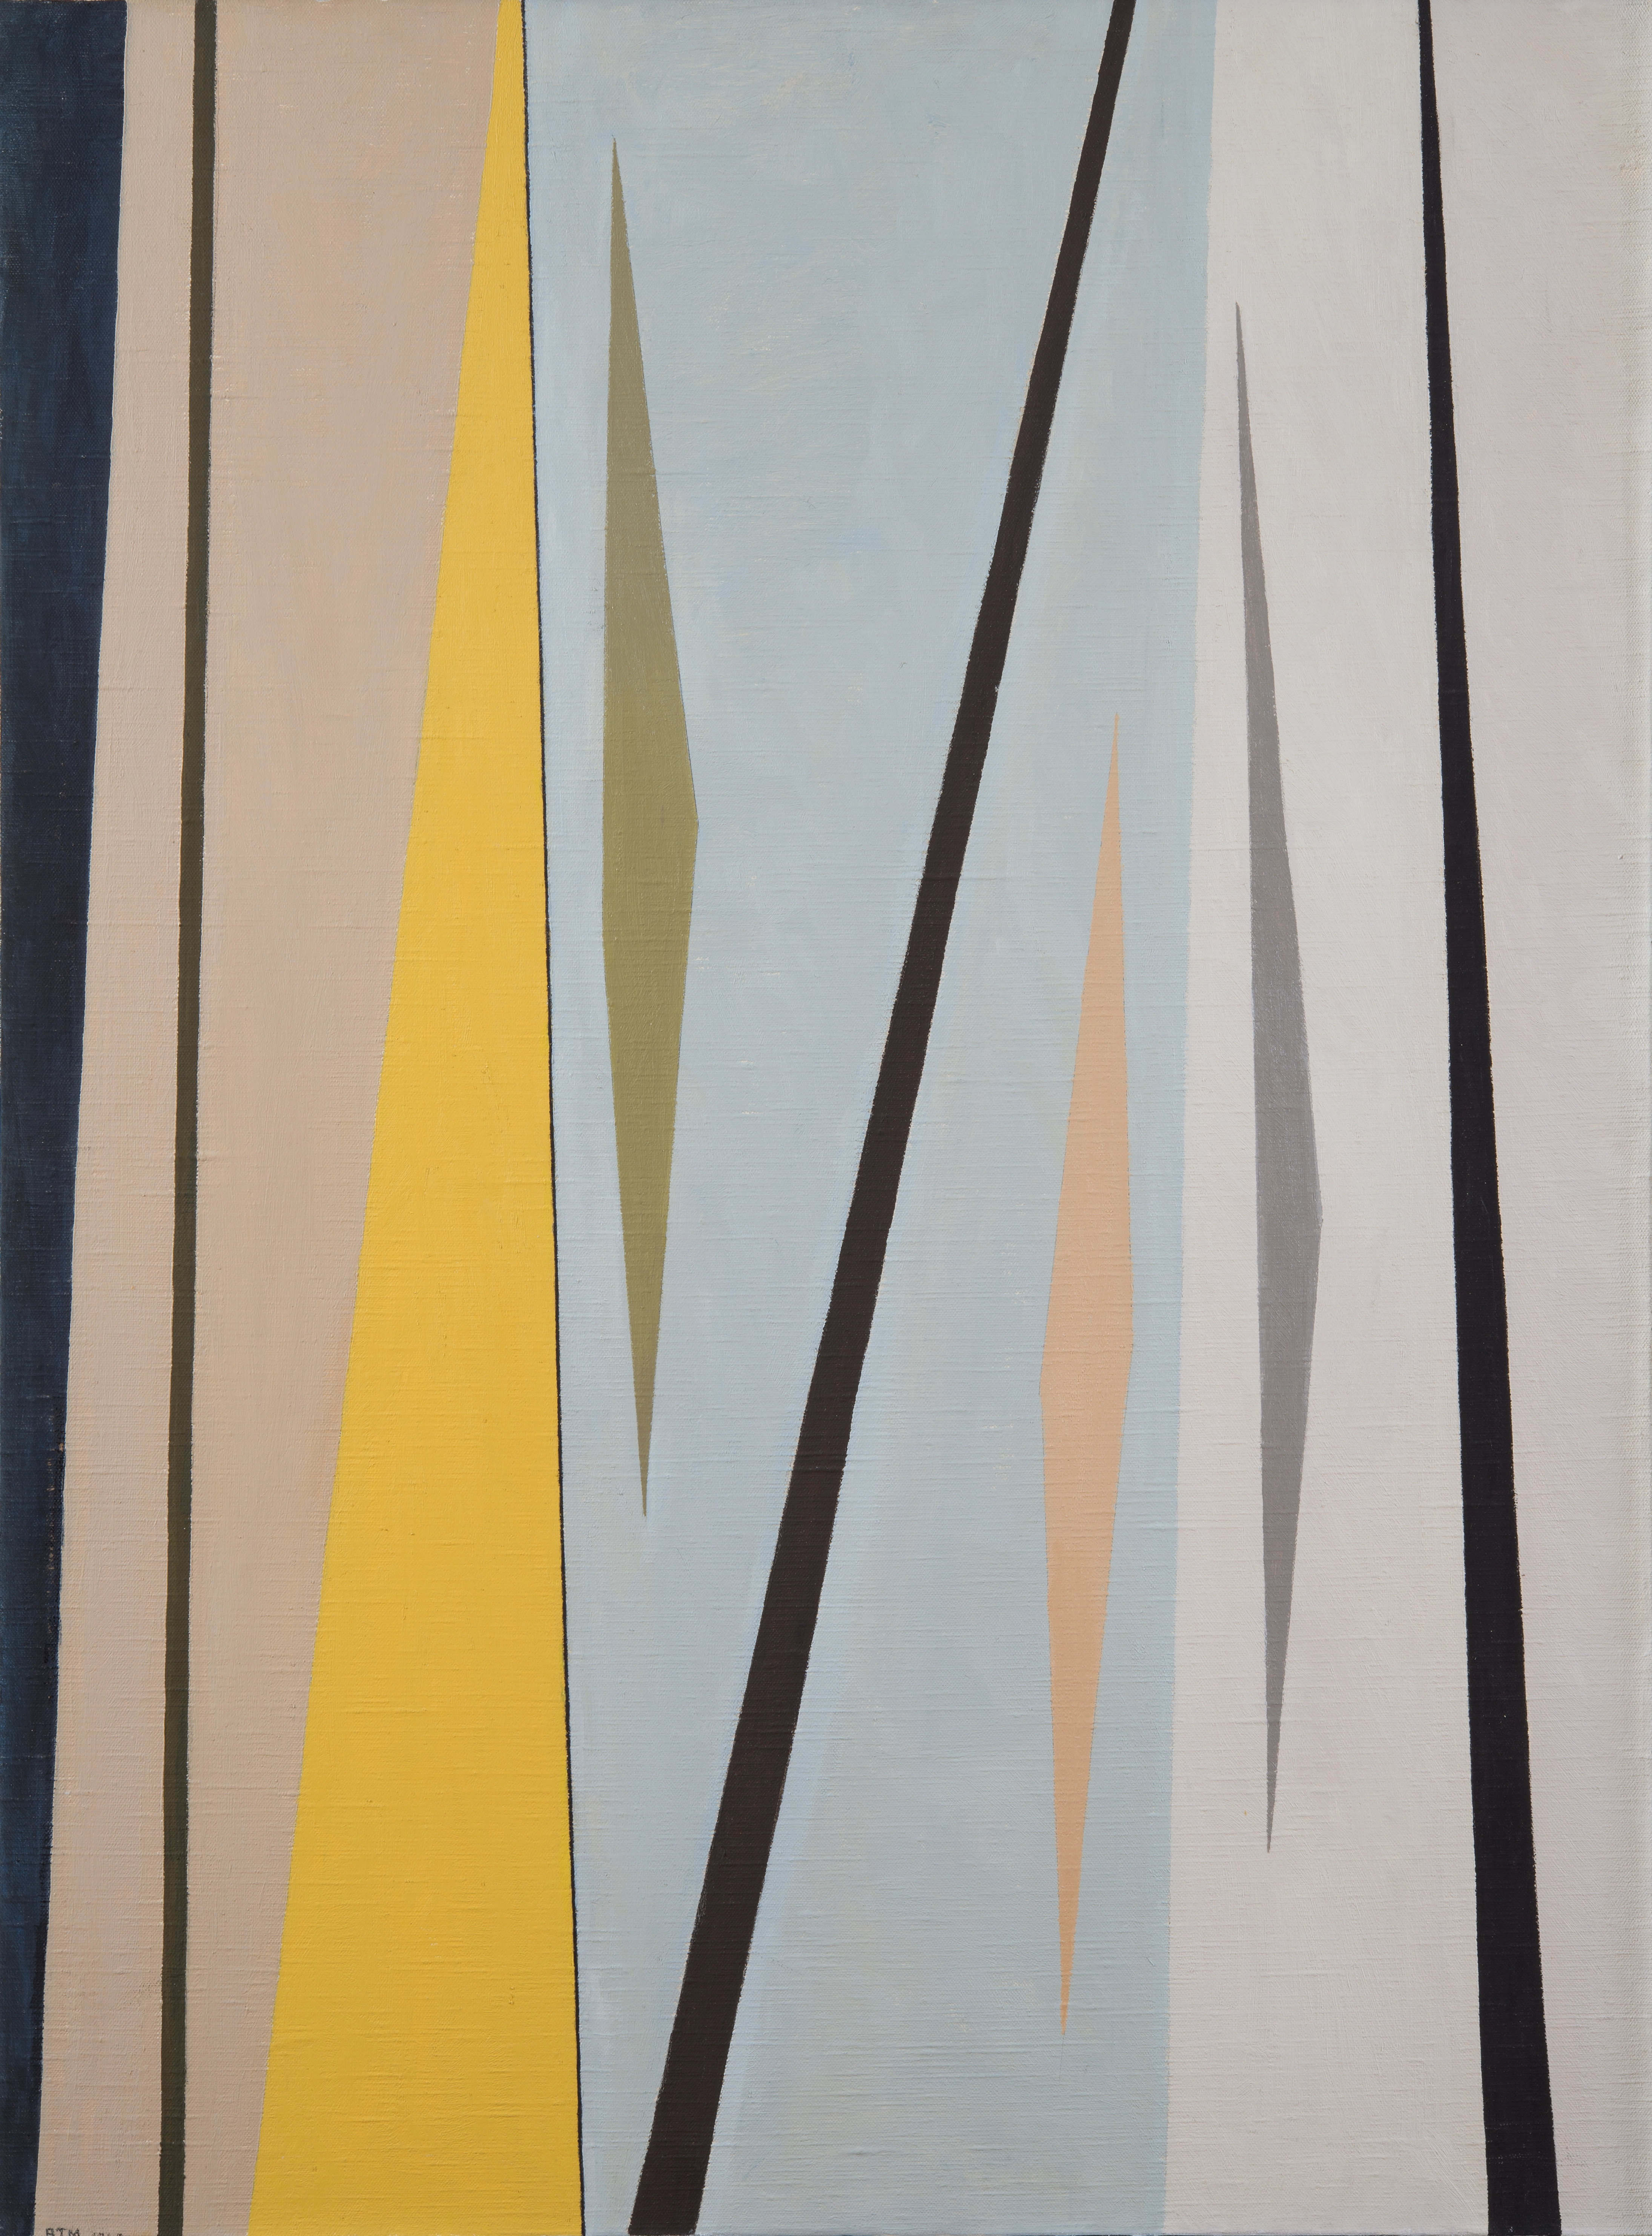 Abstract oil on canvas painting, comprised of thick vertical bands of light blue, light grey, beige, and a yellow triangle. Throughout the composition, there are thin black diagonal lines, as well as three diamond shapes (grey, pink, and a muted green).